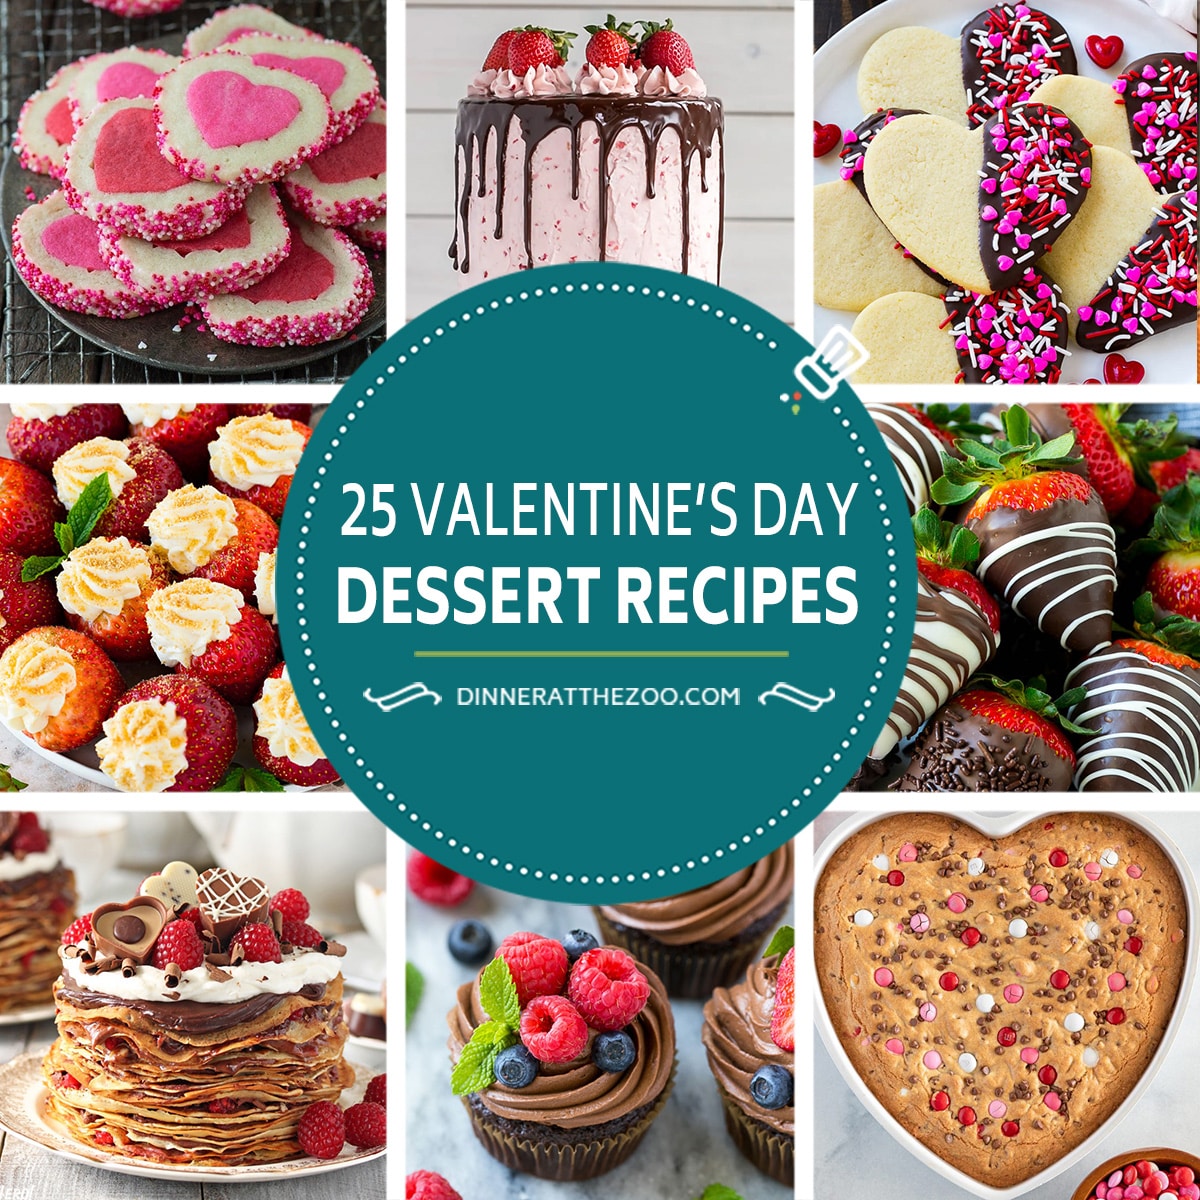 A group of images of Valentine's Day dessert recipes such as heart cookies, chocolate strawberry cake and hazelnut cupcakes.